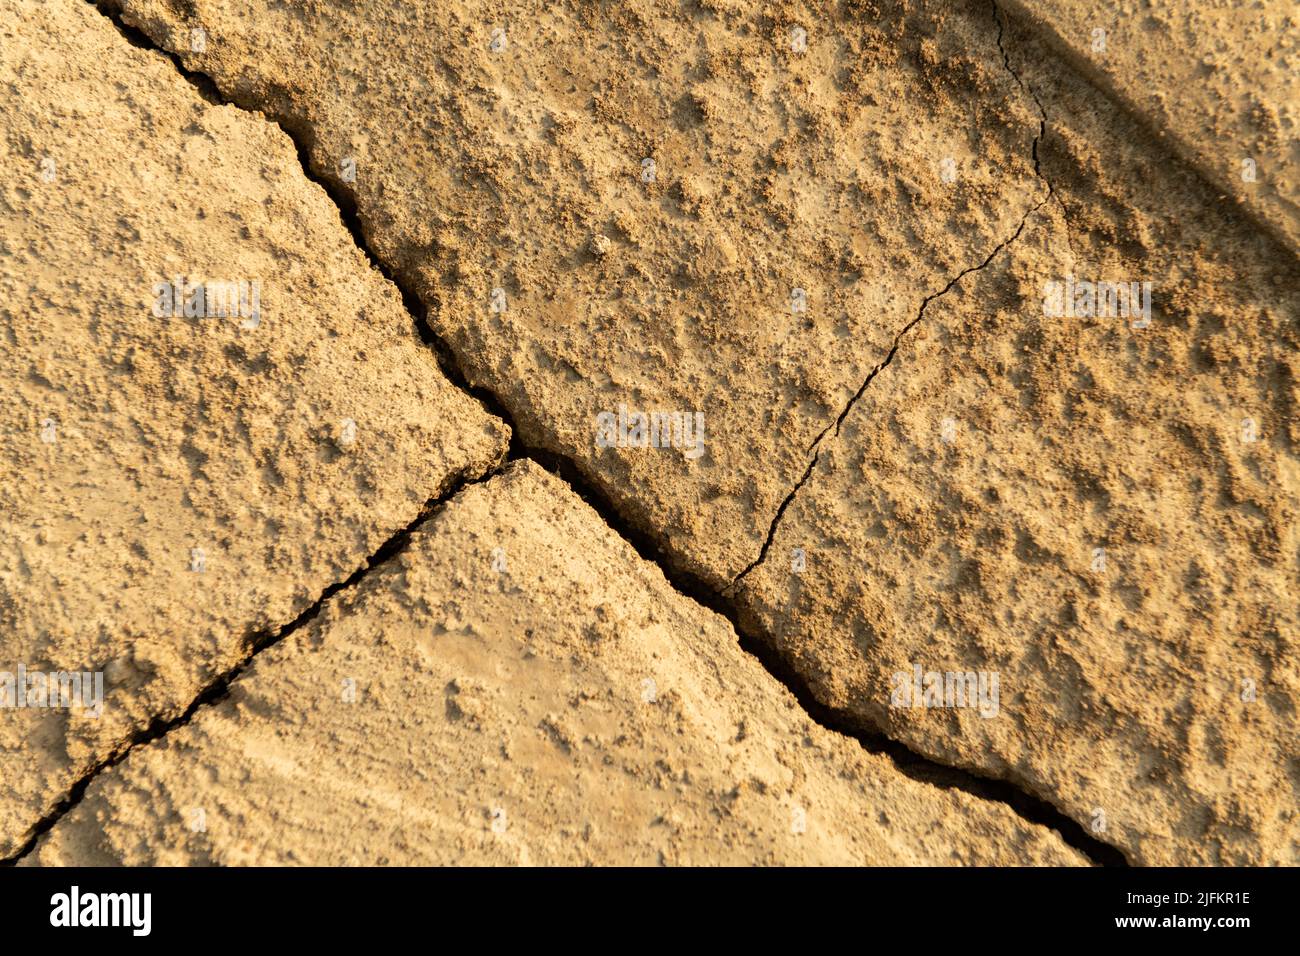 Cracked arid soil texture background. Texture of the earth during drought. Top view. Dried Land Suffering from Drought. Stock Photo